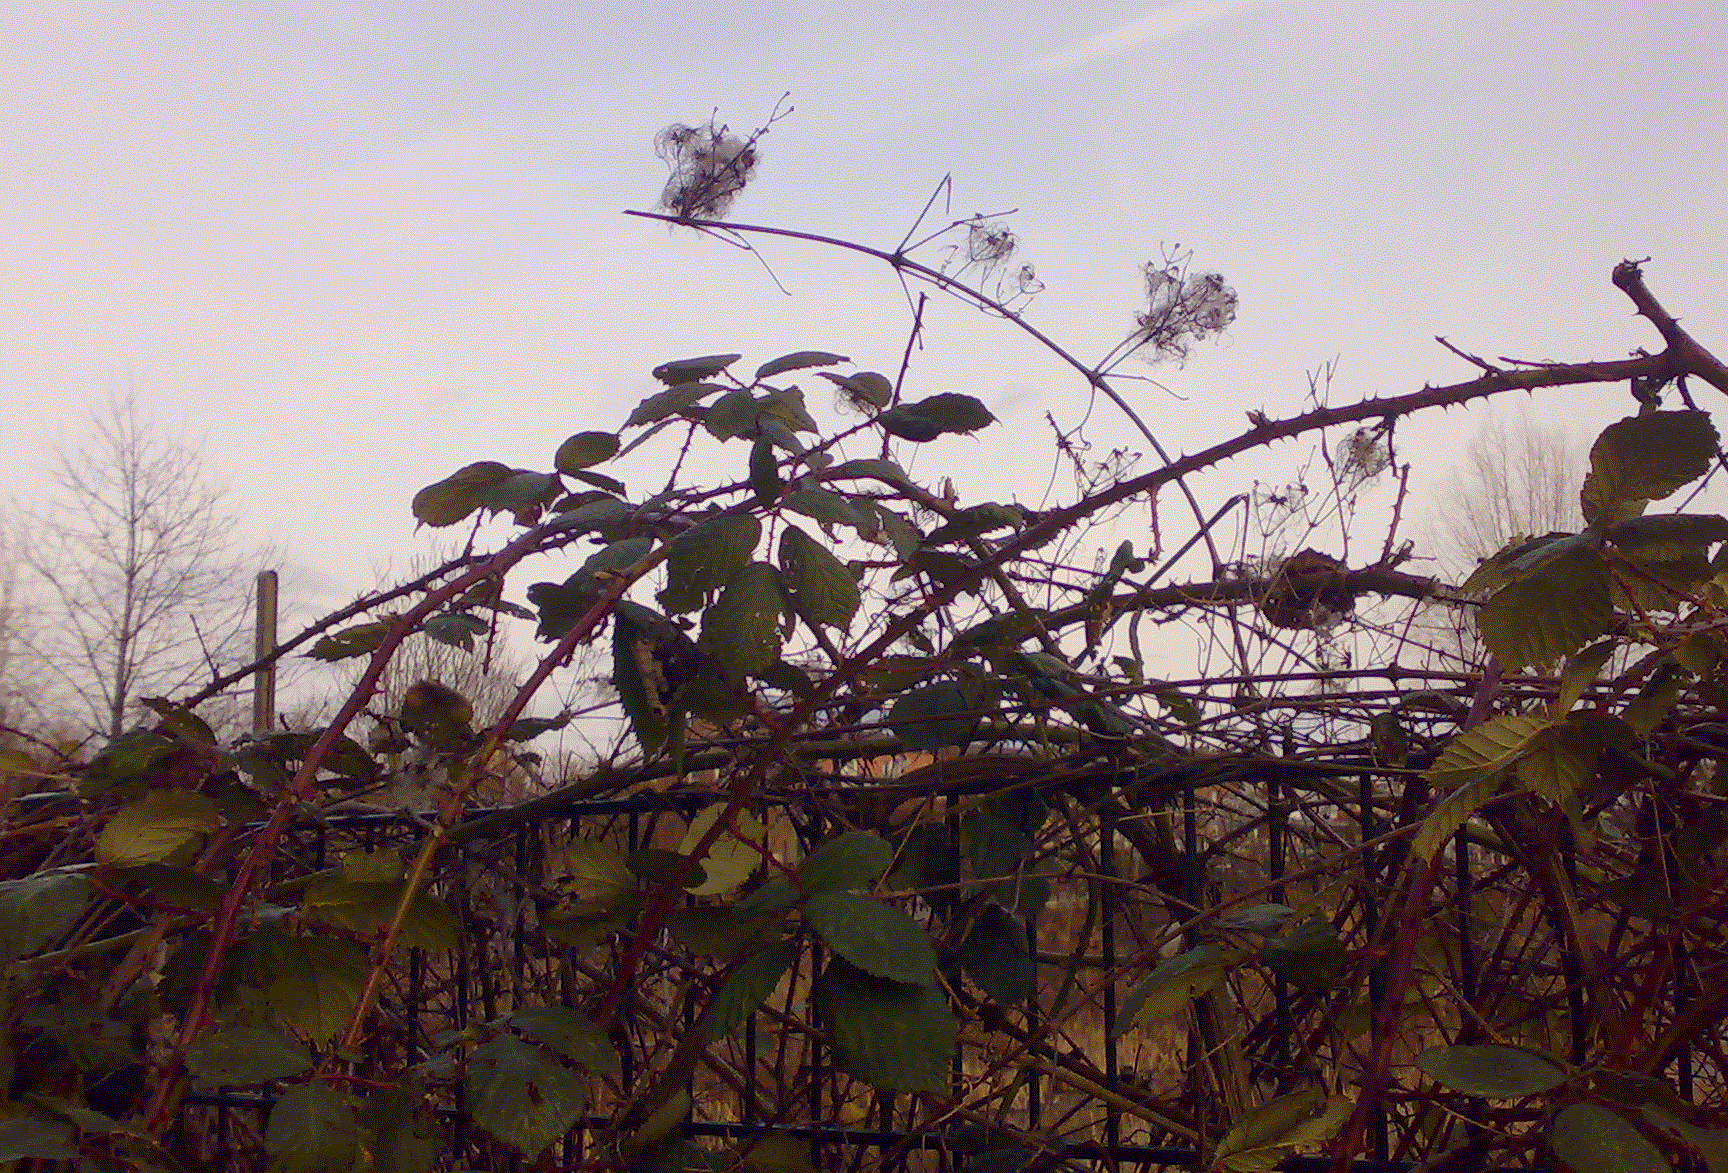 Photograph: Branches of cotton in front of a purple cloudy sky